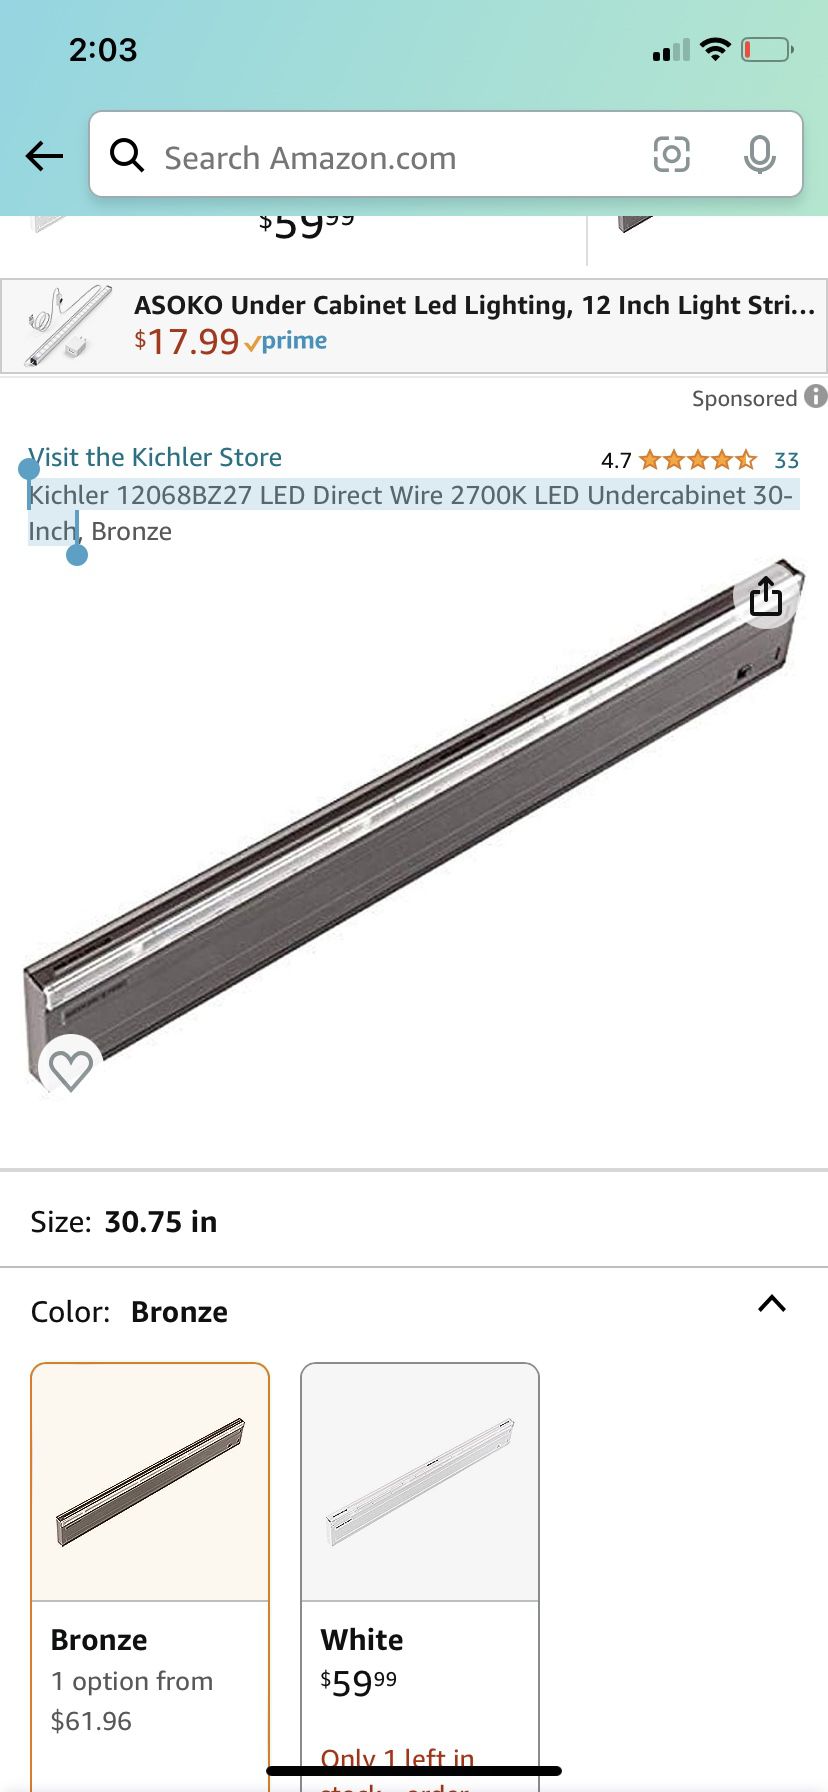 Kichler 12068BZ27 LED Direct Wire 2700K LED Undercabinet 30-Inch for Sale  in Murrieta, CA OfferUp